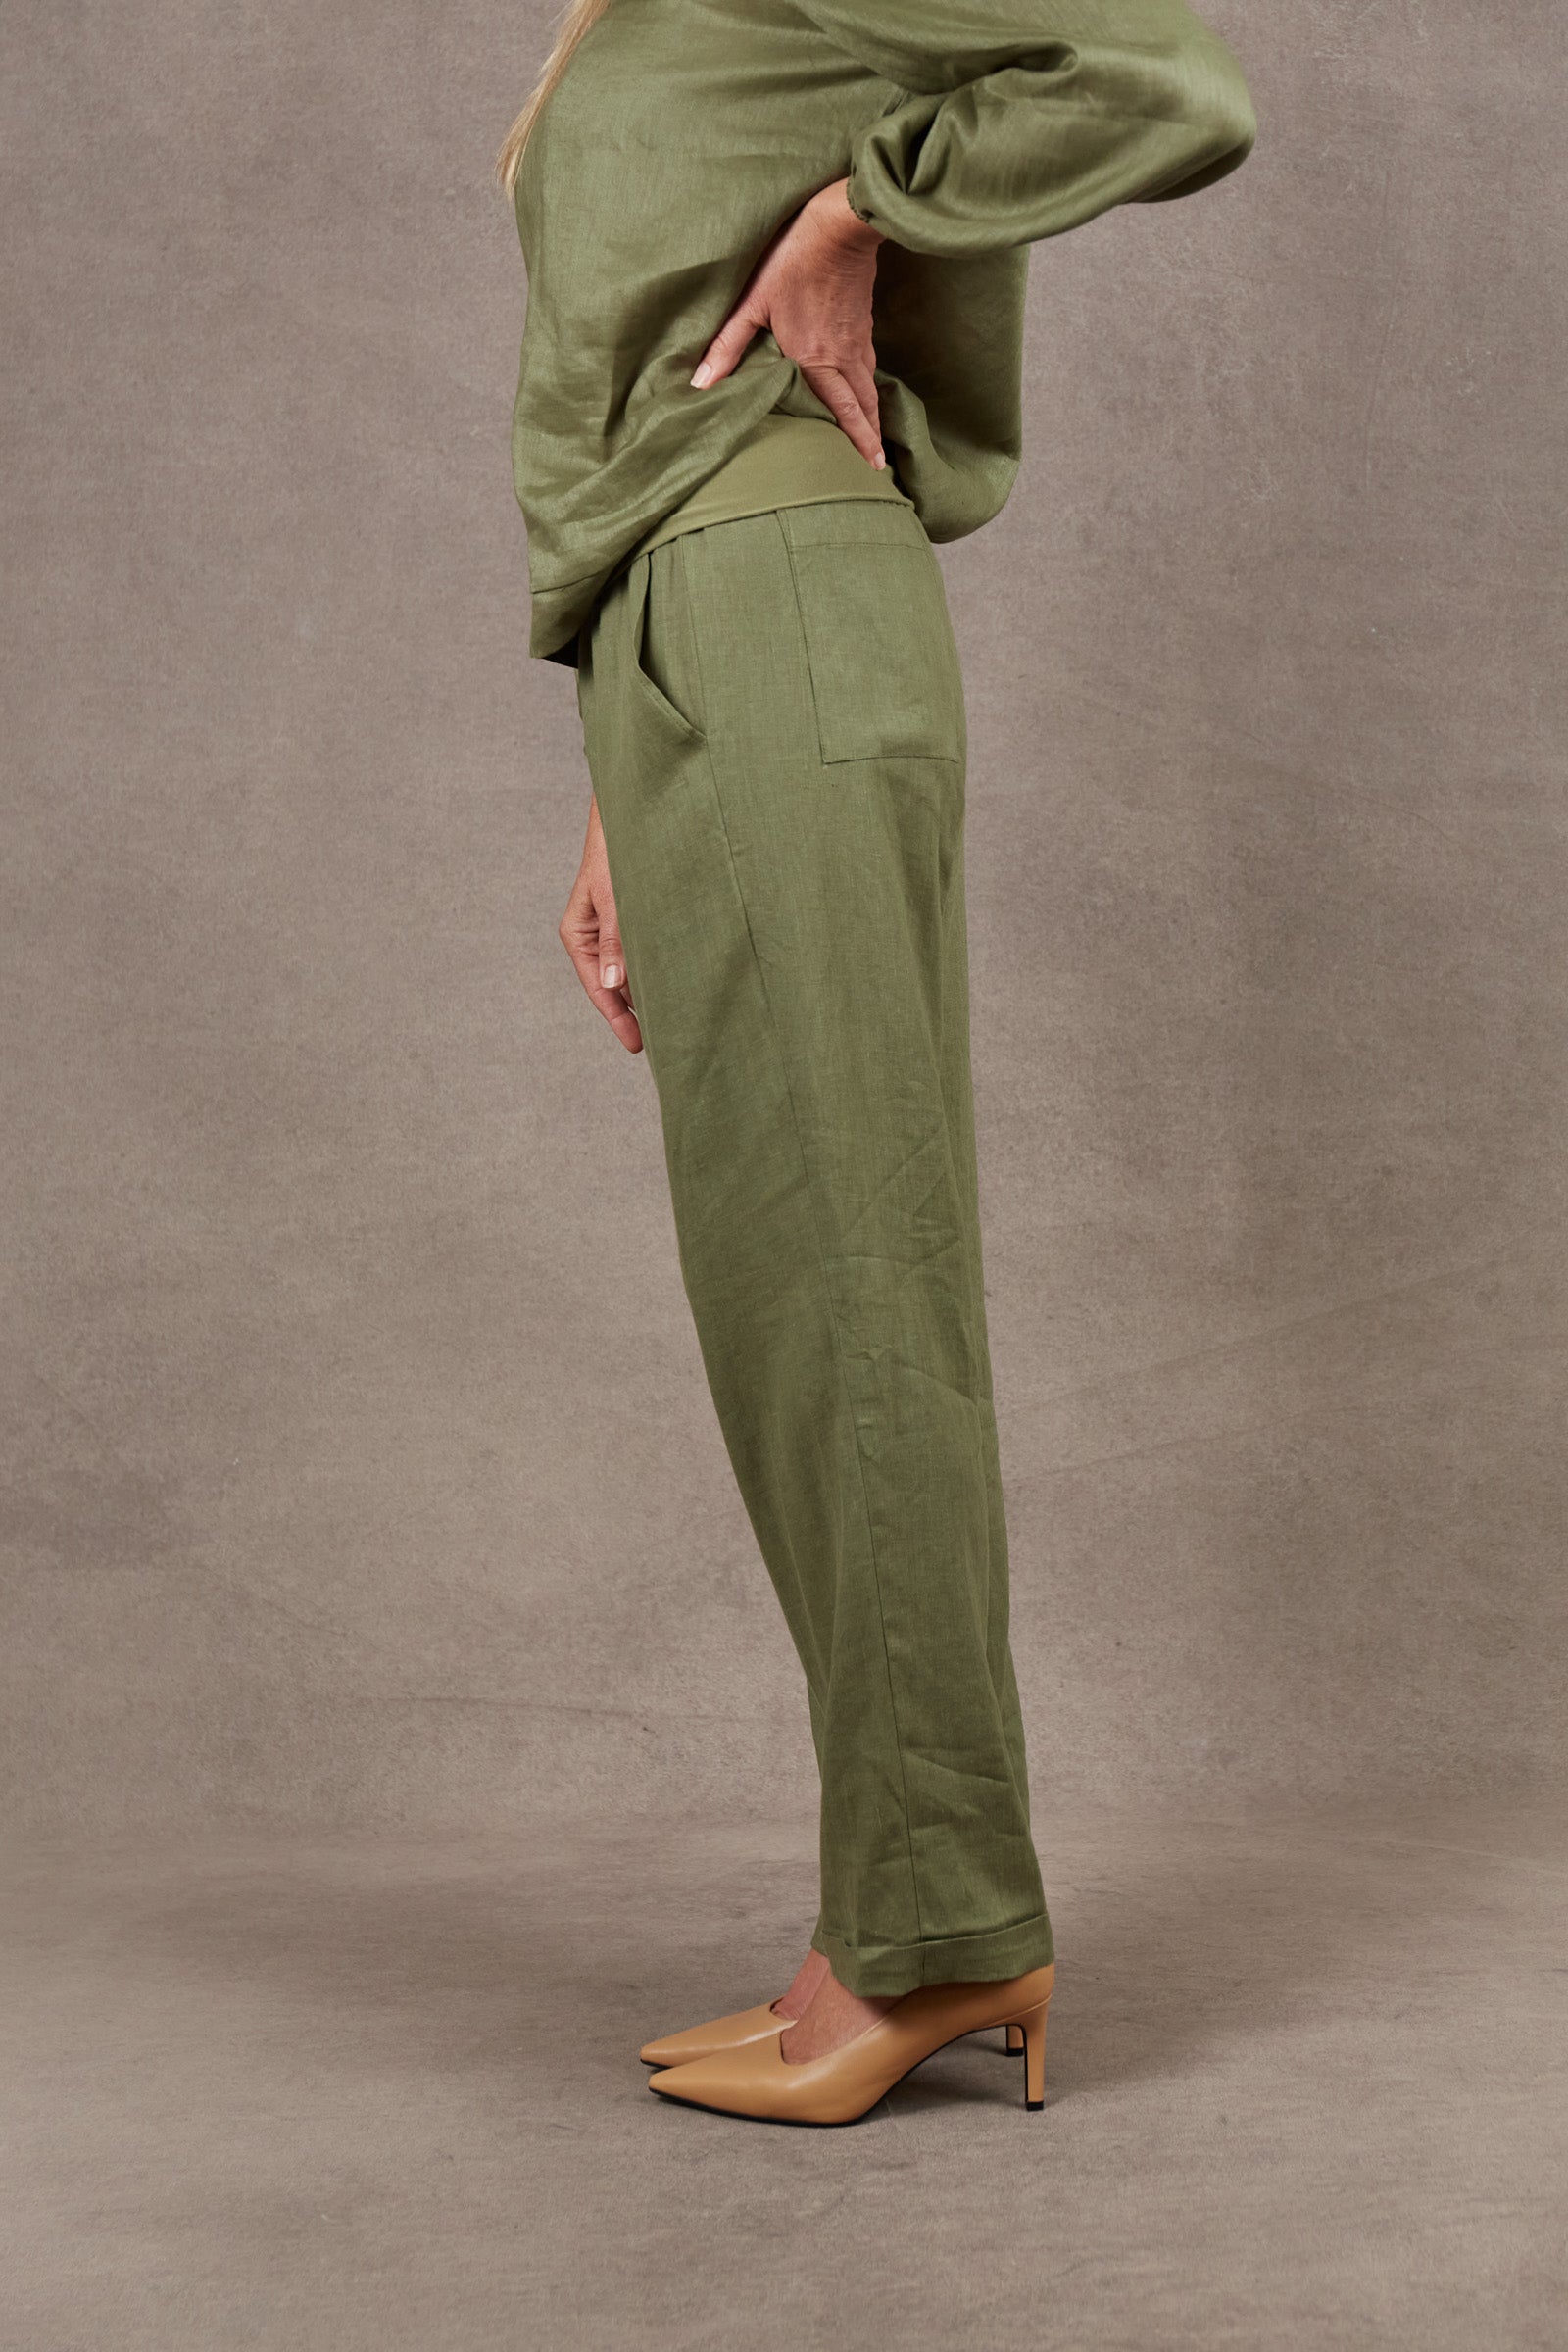 Nama Relax Pant - Fern - eb&ive Clothing - Pant Relaxed Linen